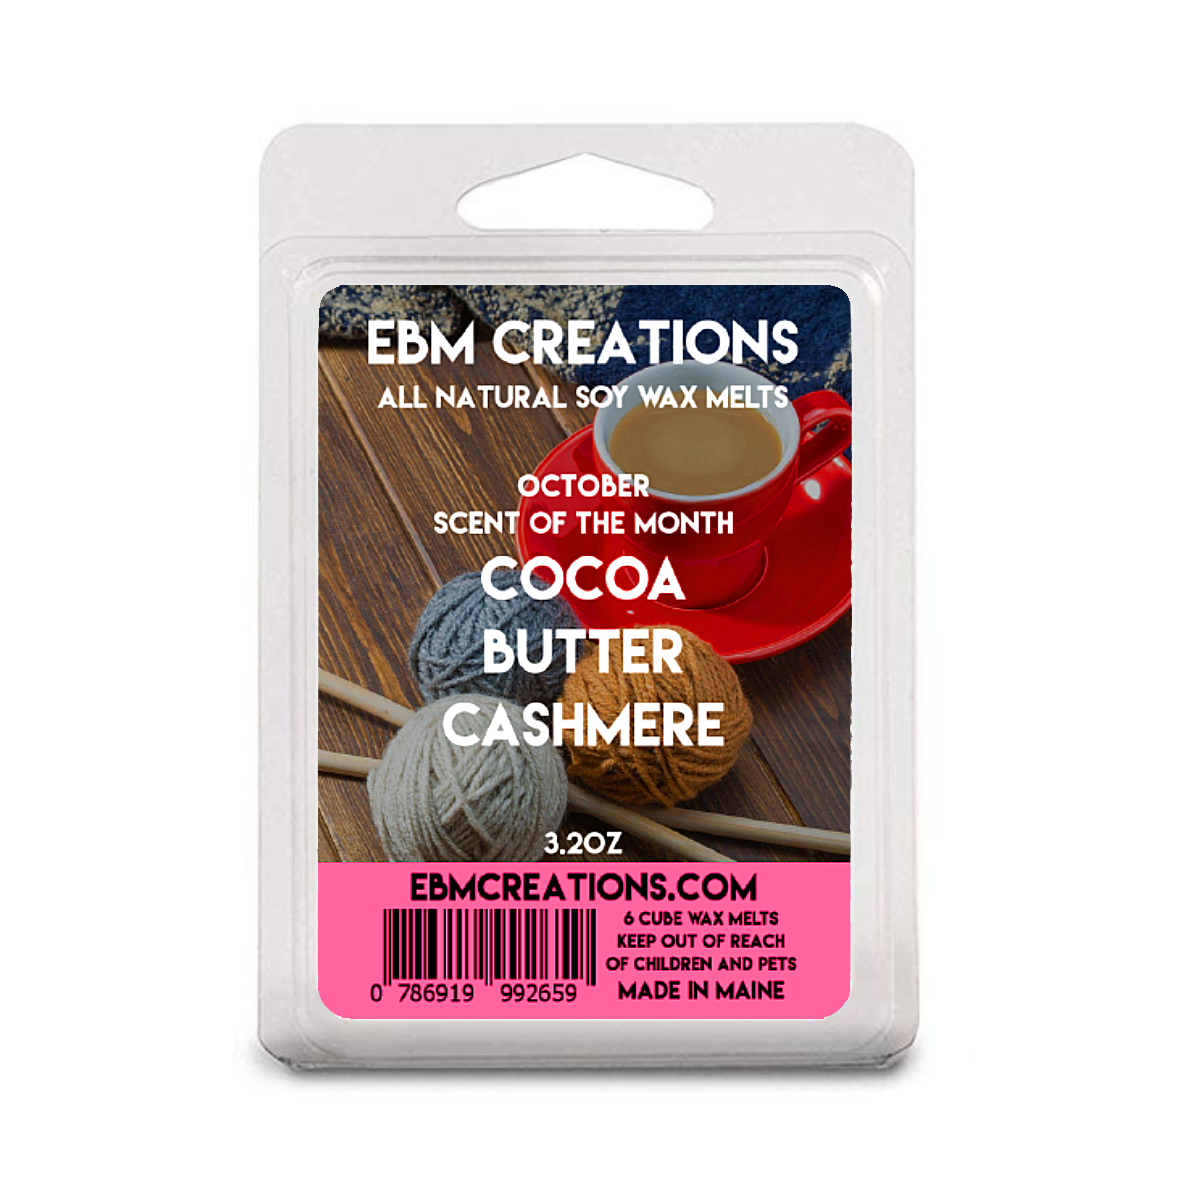 Cocoa Butter Cashmere - 3.2 oz Clamshell